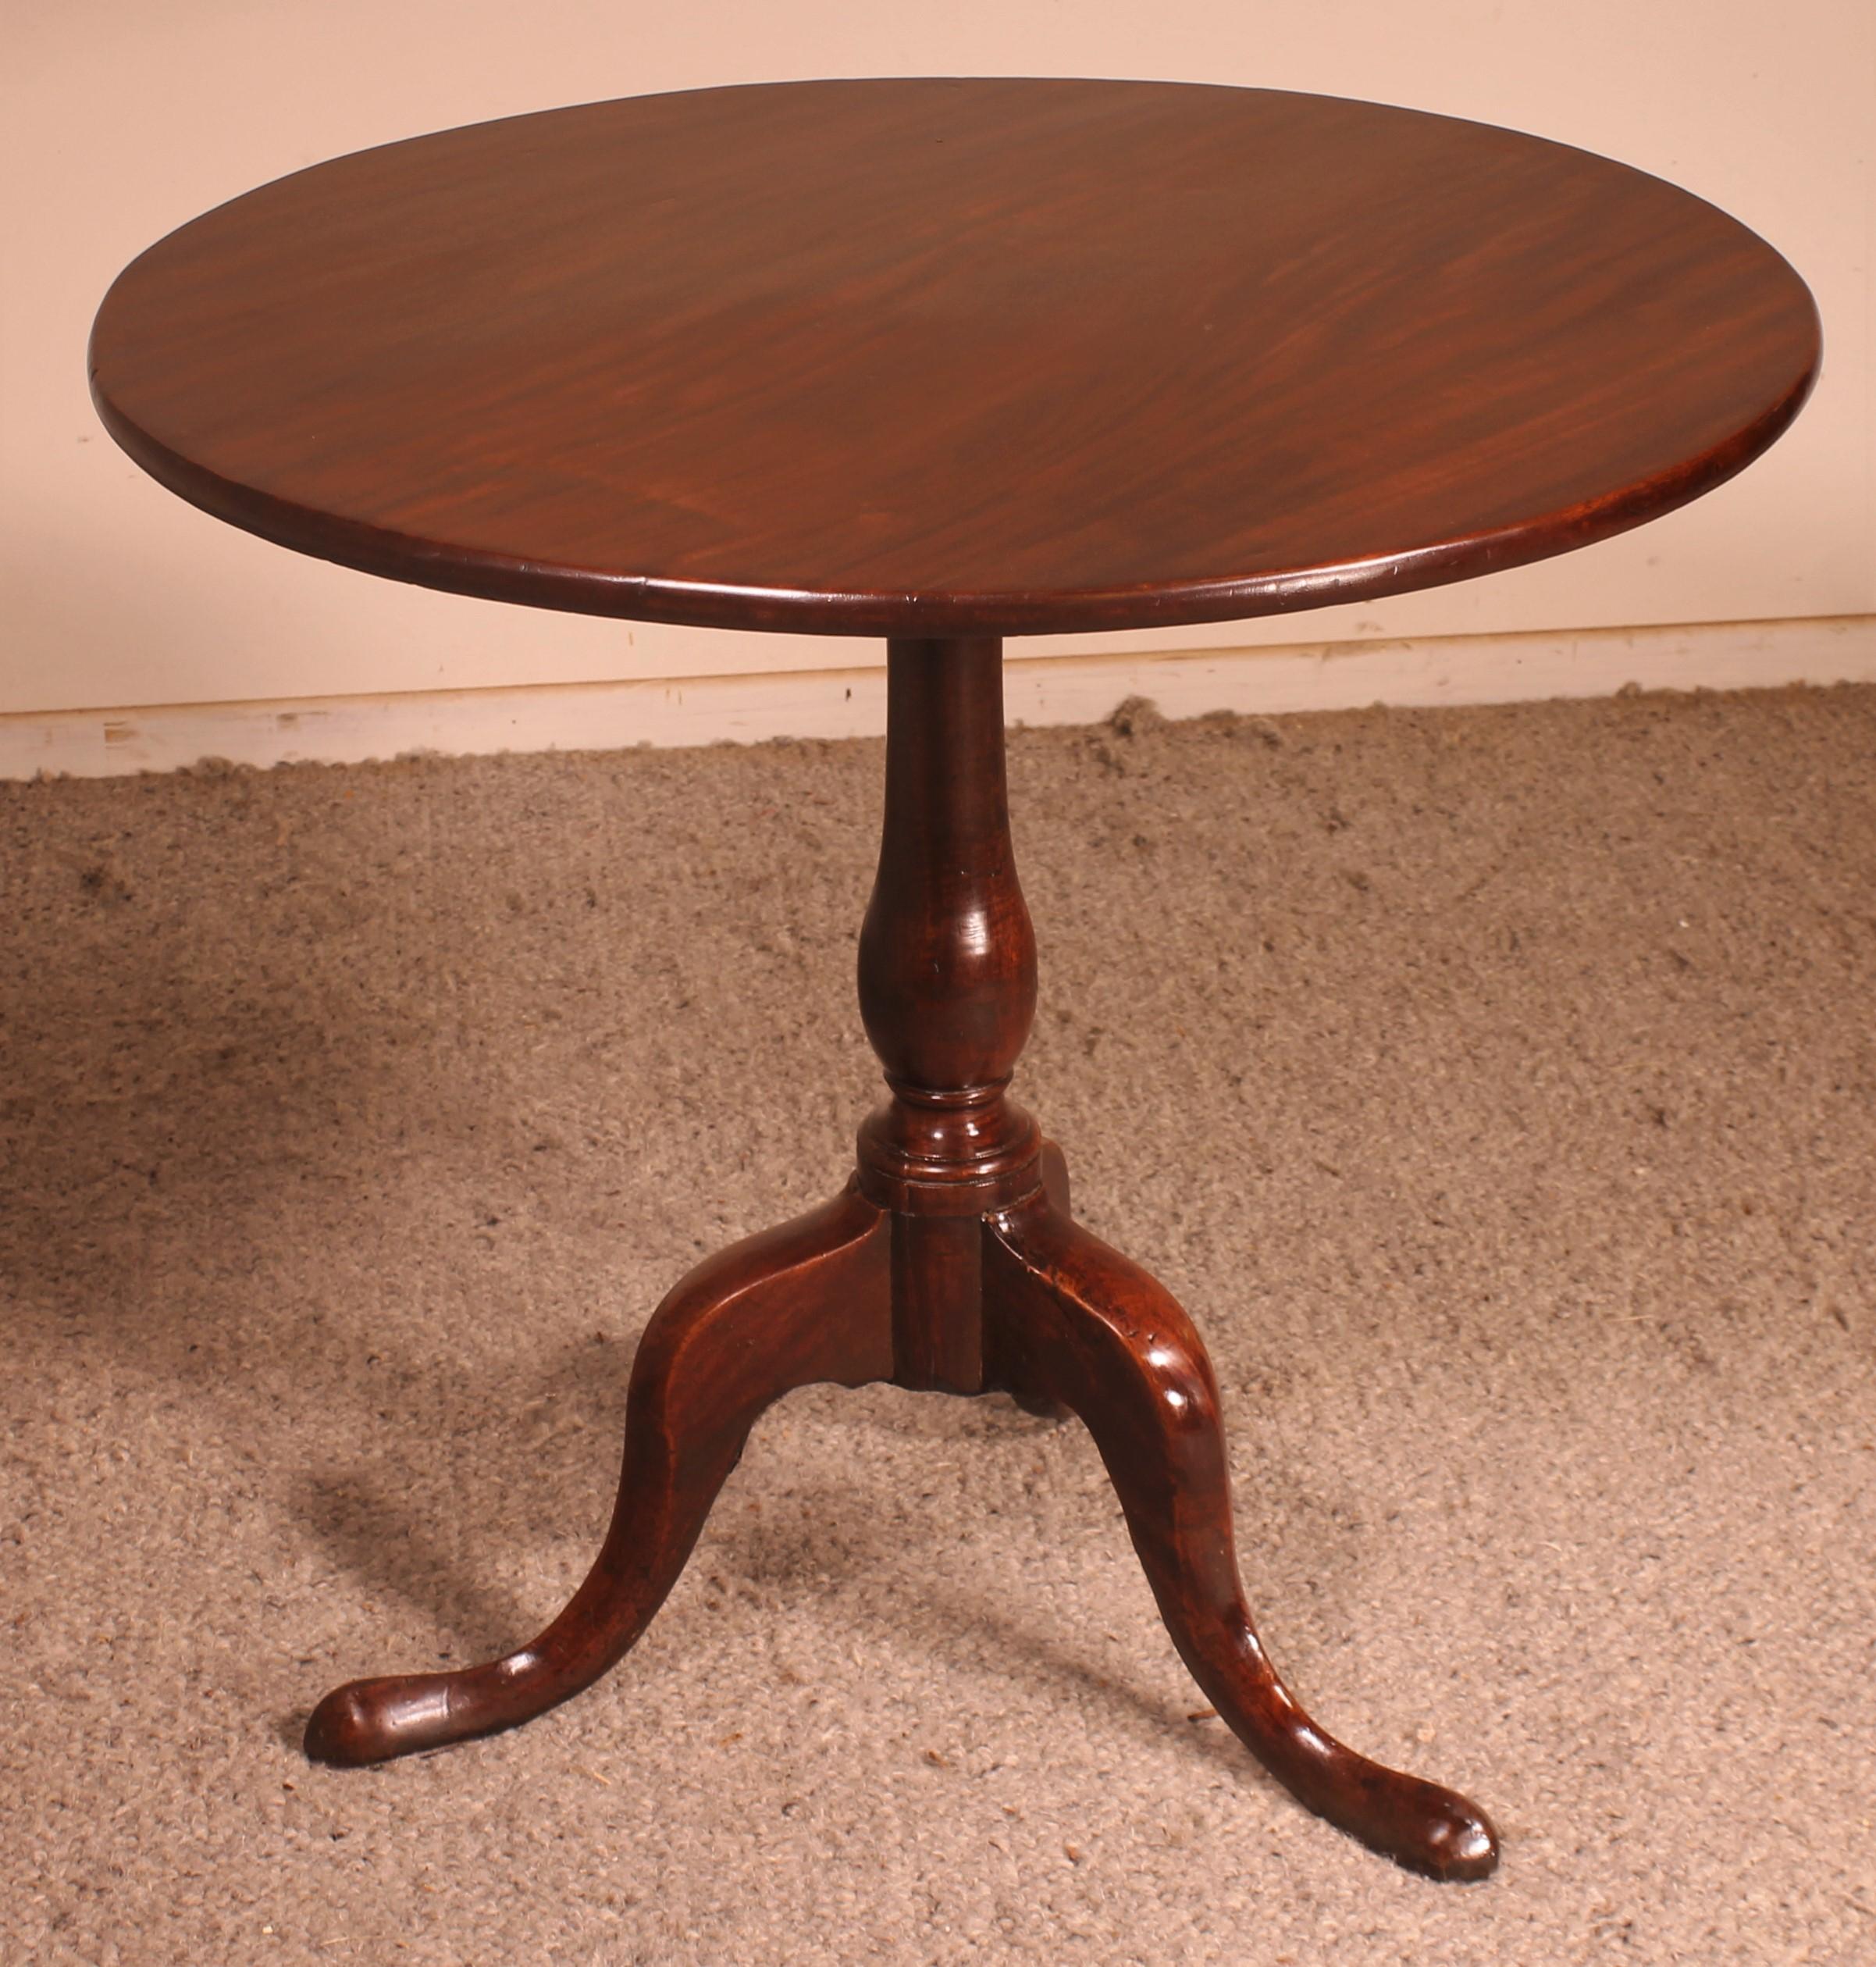 Elegant English pedestal table/ tripod table from the19th century in solid mahogany.
Beautiful one-piece table top in solid mahogany with a diameter of 78cm
Tripod base with a very beautiful turning
Very beautiful patina and in superb condition.